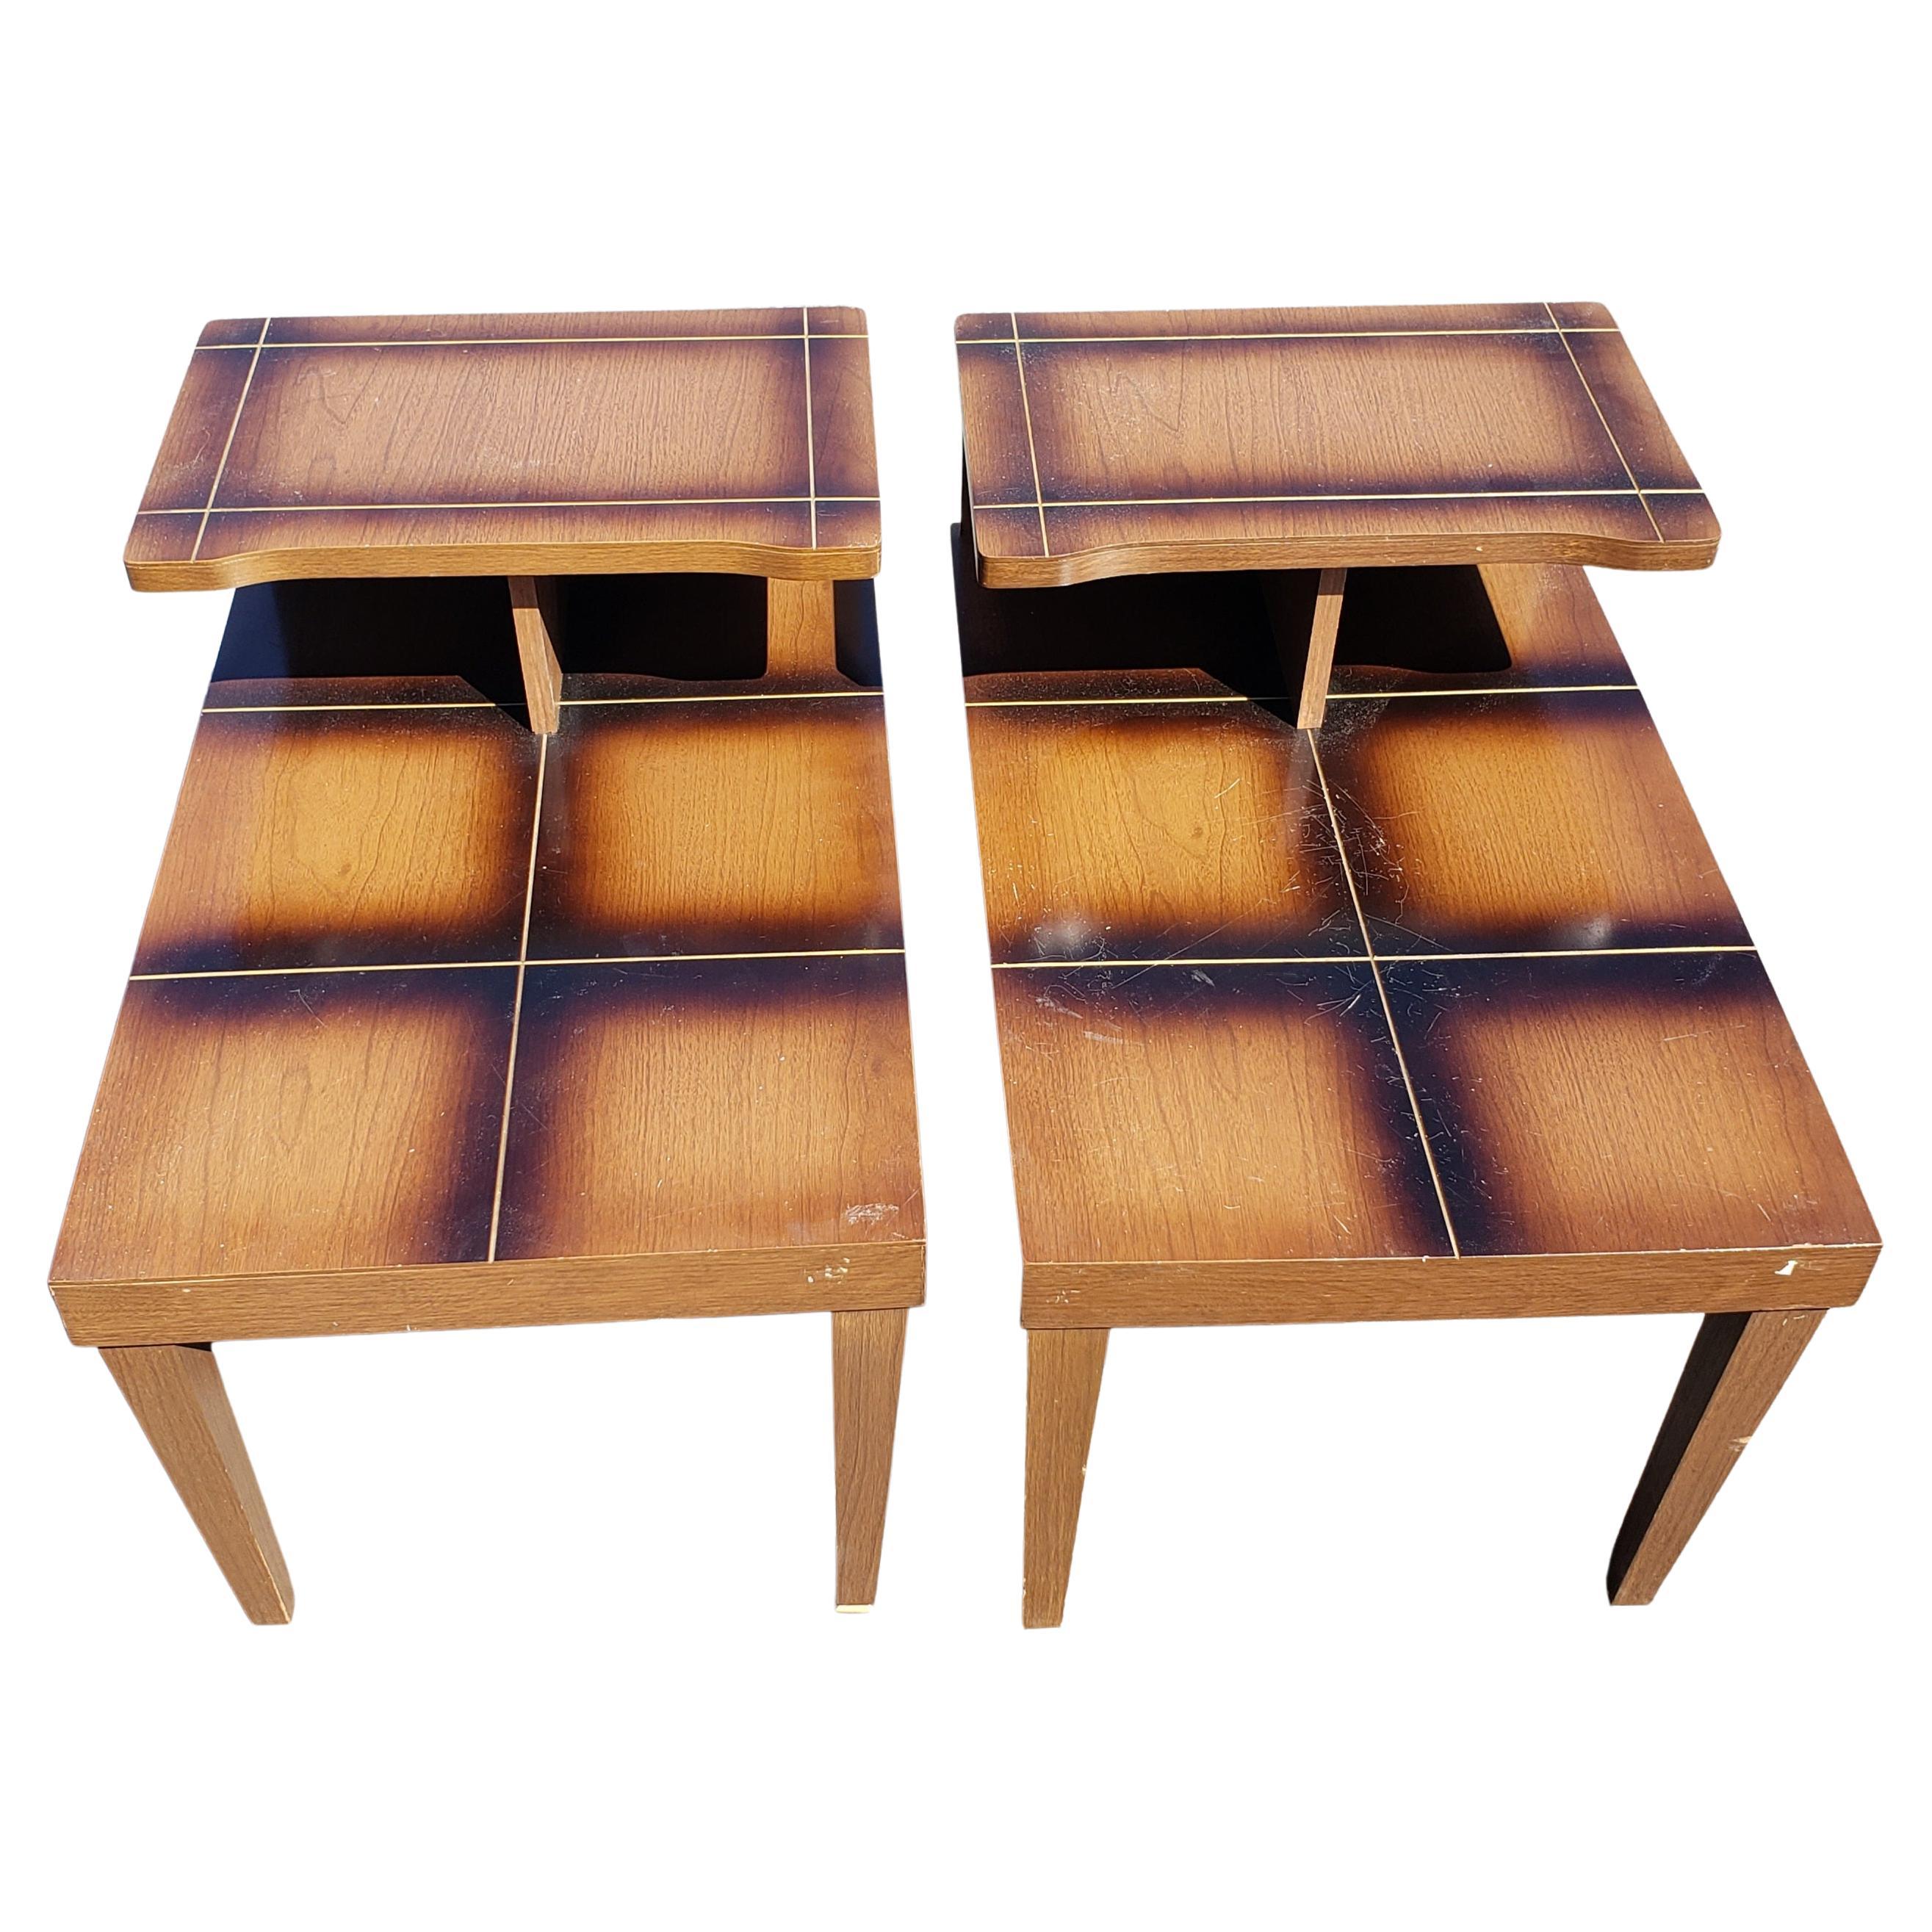 Mid-Century Modern laminate top two tier side table.
Very good vintage condition.
Some light scratches, consistent with age and normal use
Measures 17.75